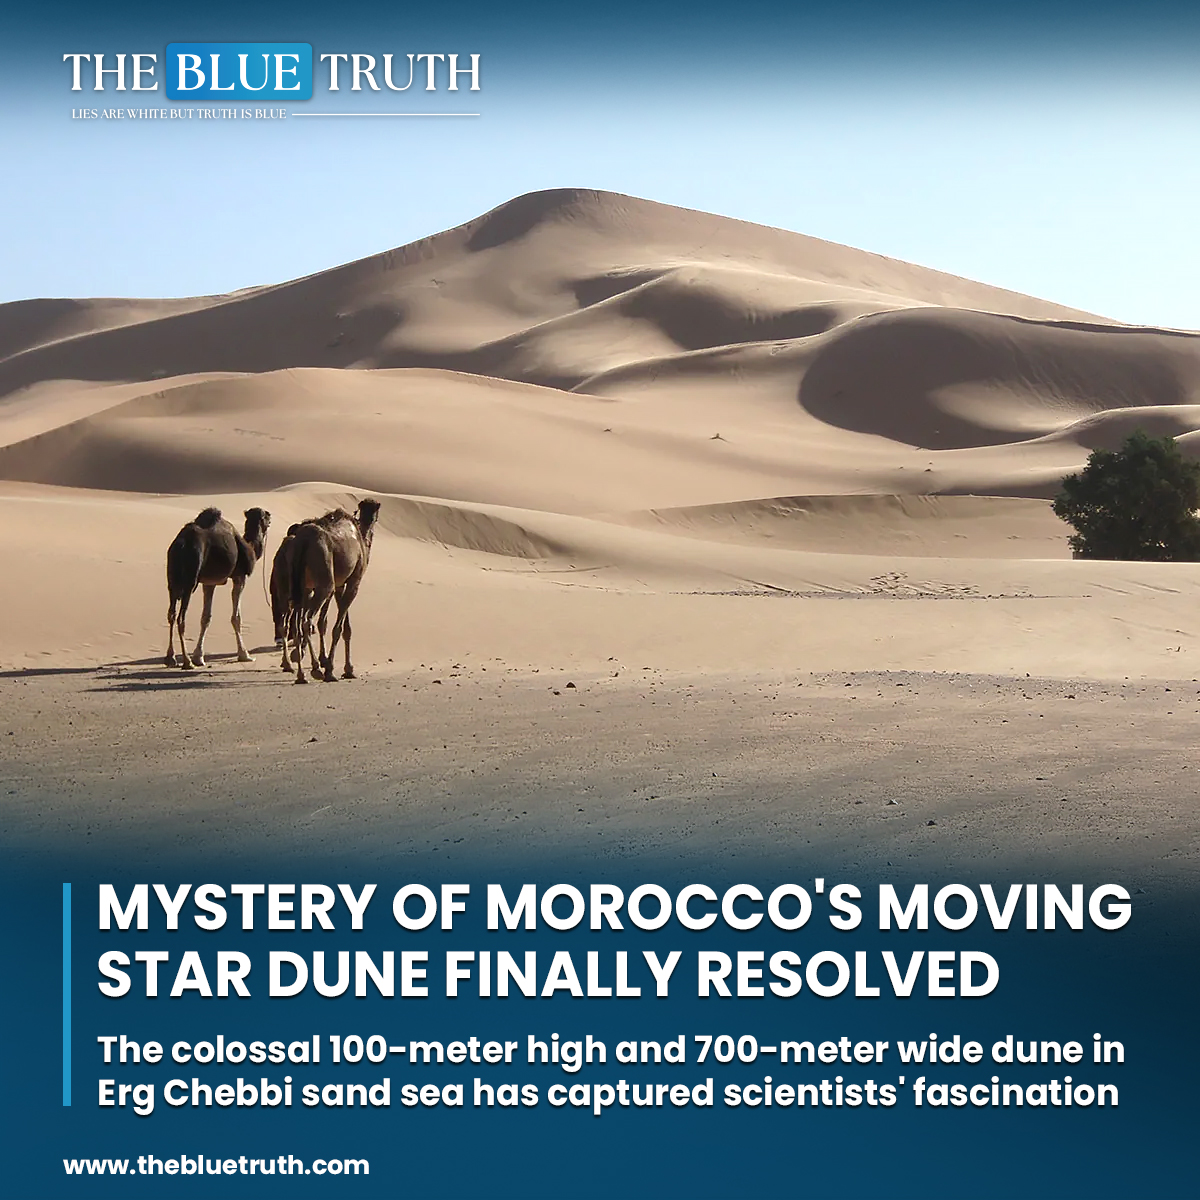 A team of researchers, including experts from Aberystwyth University, has made astonishing discoveries.
#LalaLalliaDune #ErgChebbi #SandDunes #MoroccoDiscovery #ResearchTeam
#AberystwythUniversity #DesertExploration #GeologicalWonders #ScientificDiscoveries #tbt #TheBlueTruth